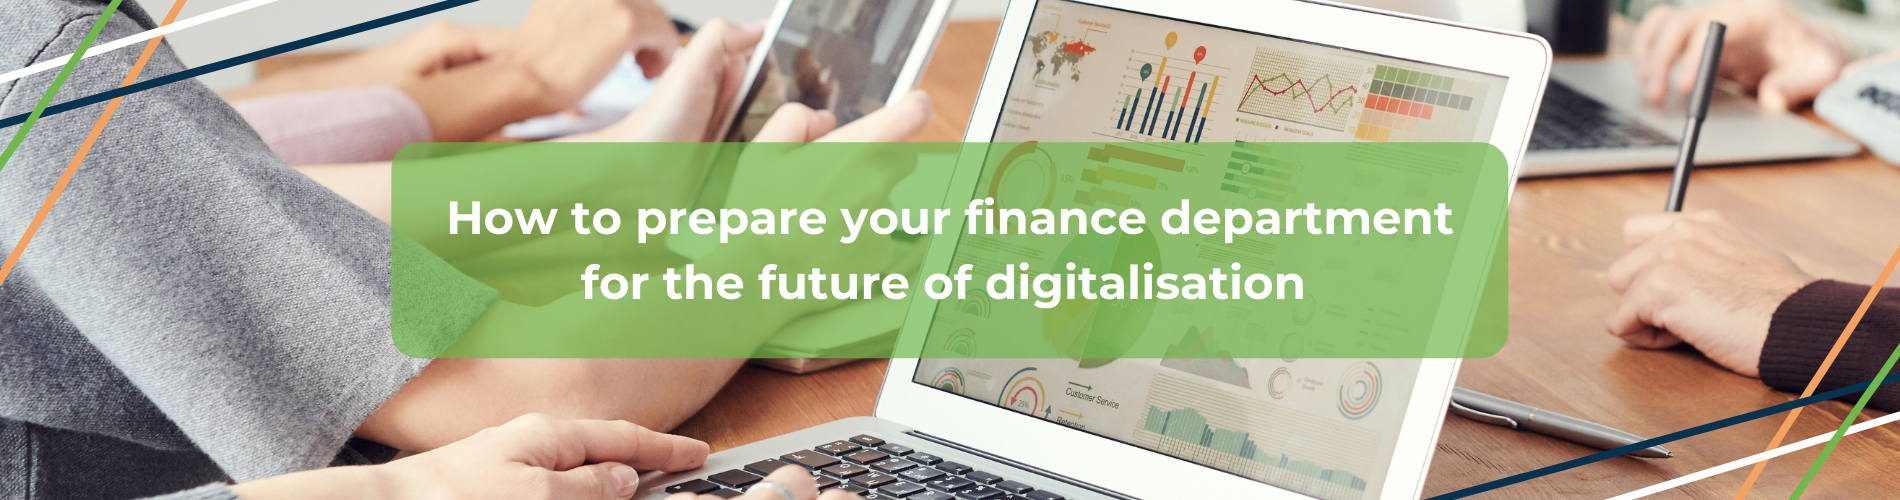 Image reads: How to prepare your finance department for the future of digitalisation